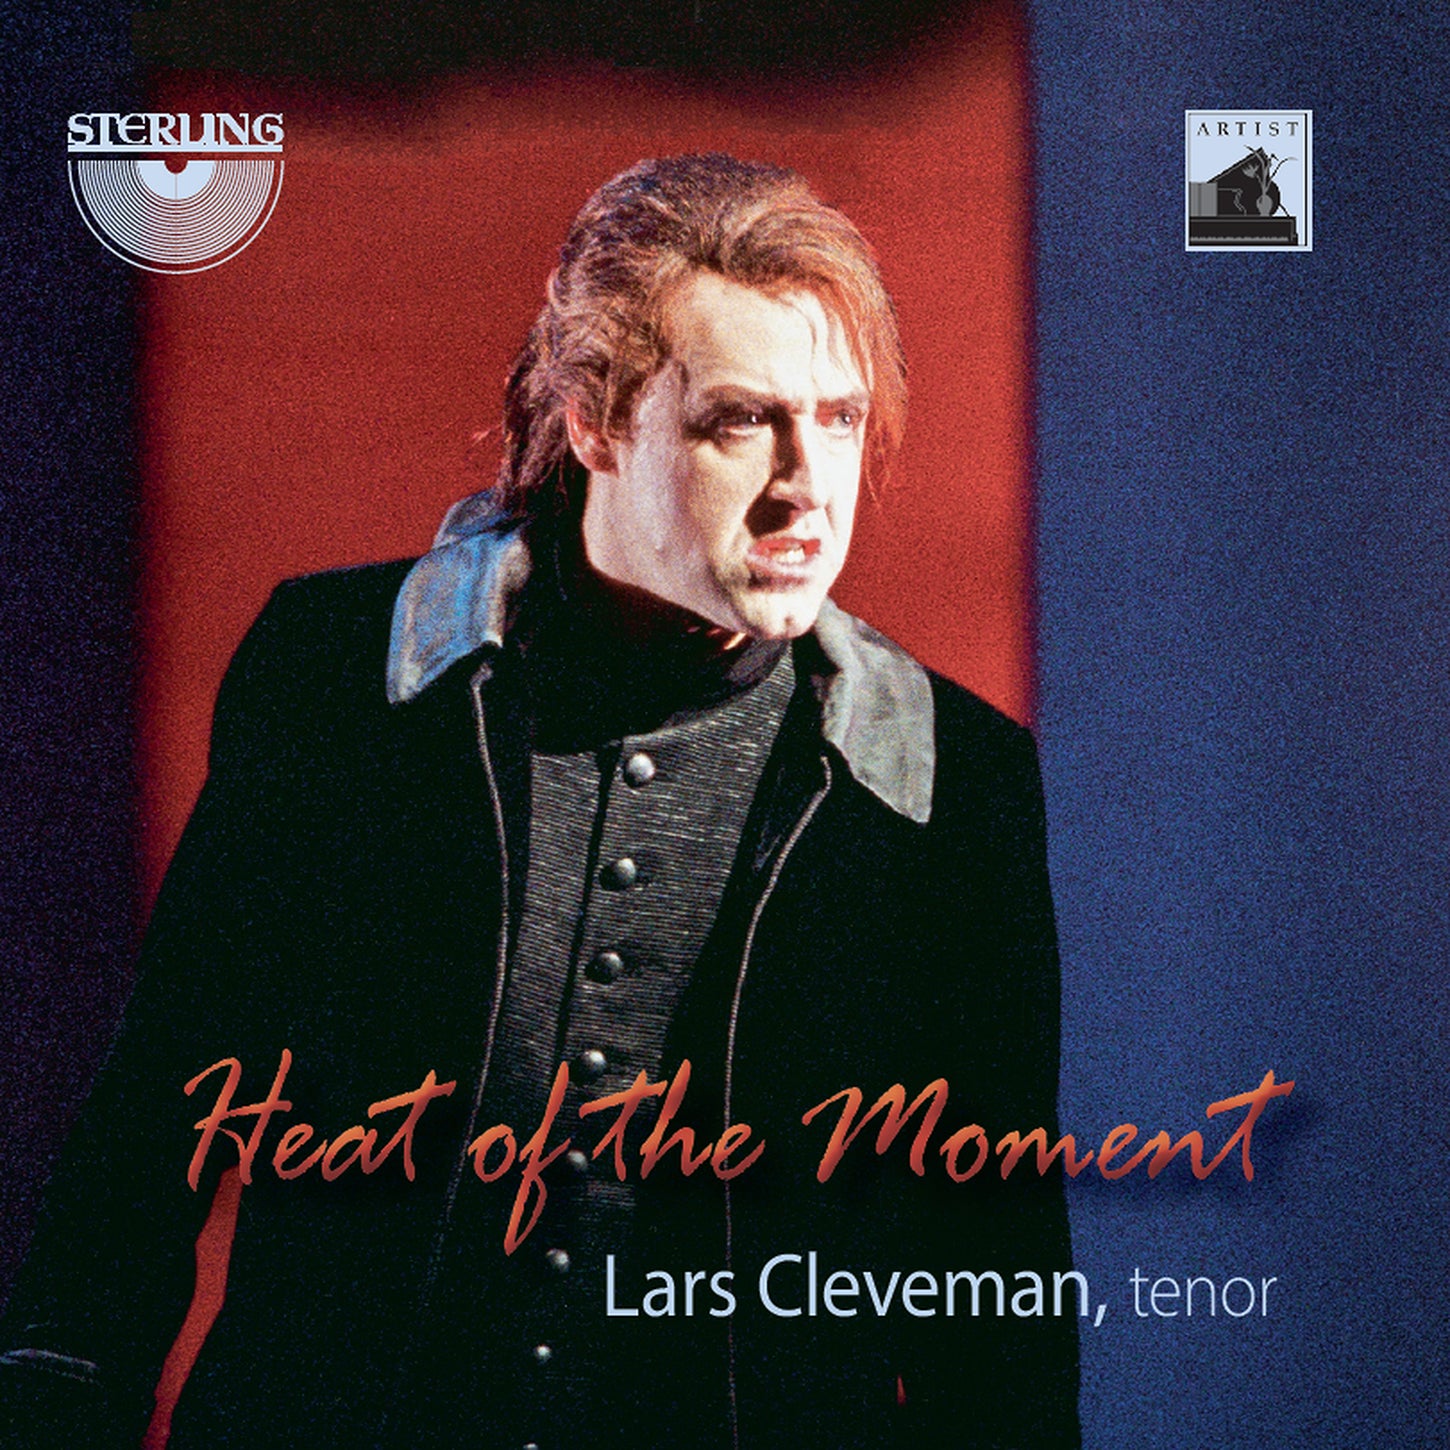 Wagner, Puccini et al.: Heat of the Moment - A Lars Cleveman Tribute / Royal Opera Stockholm